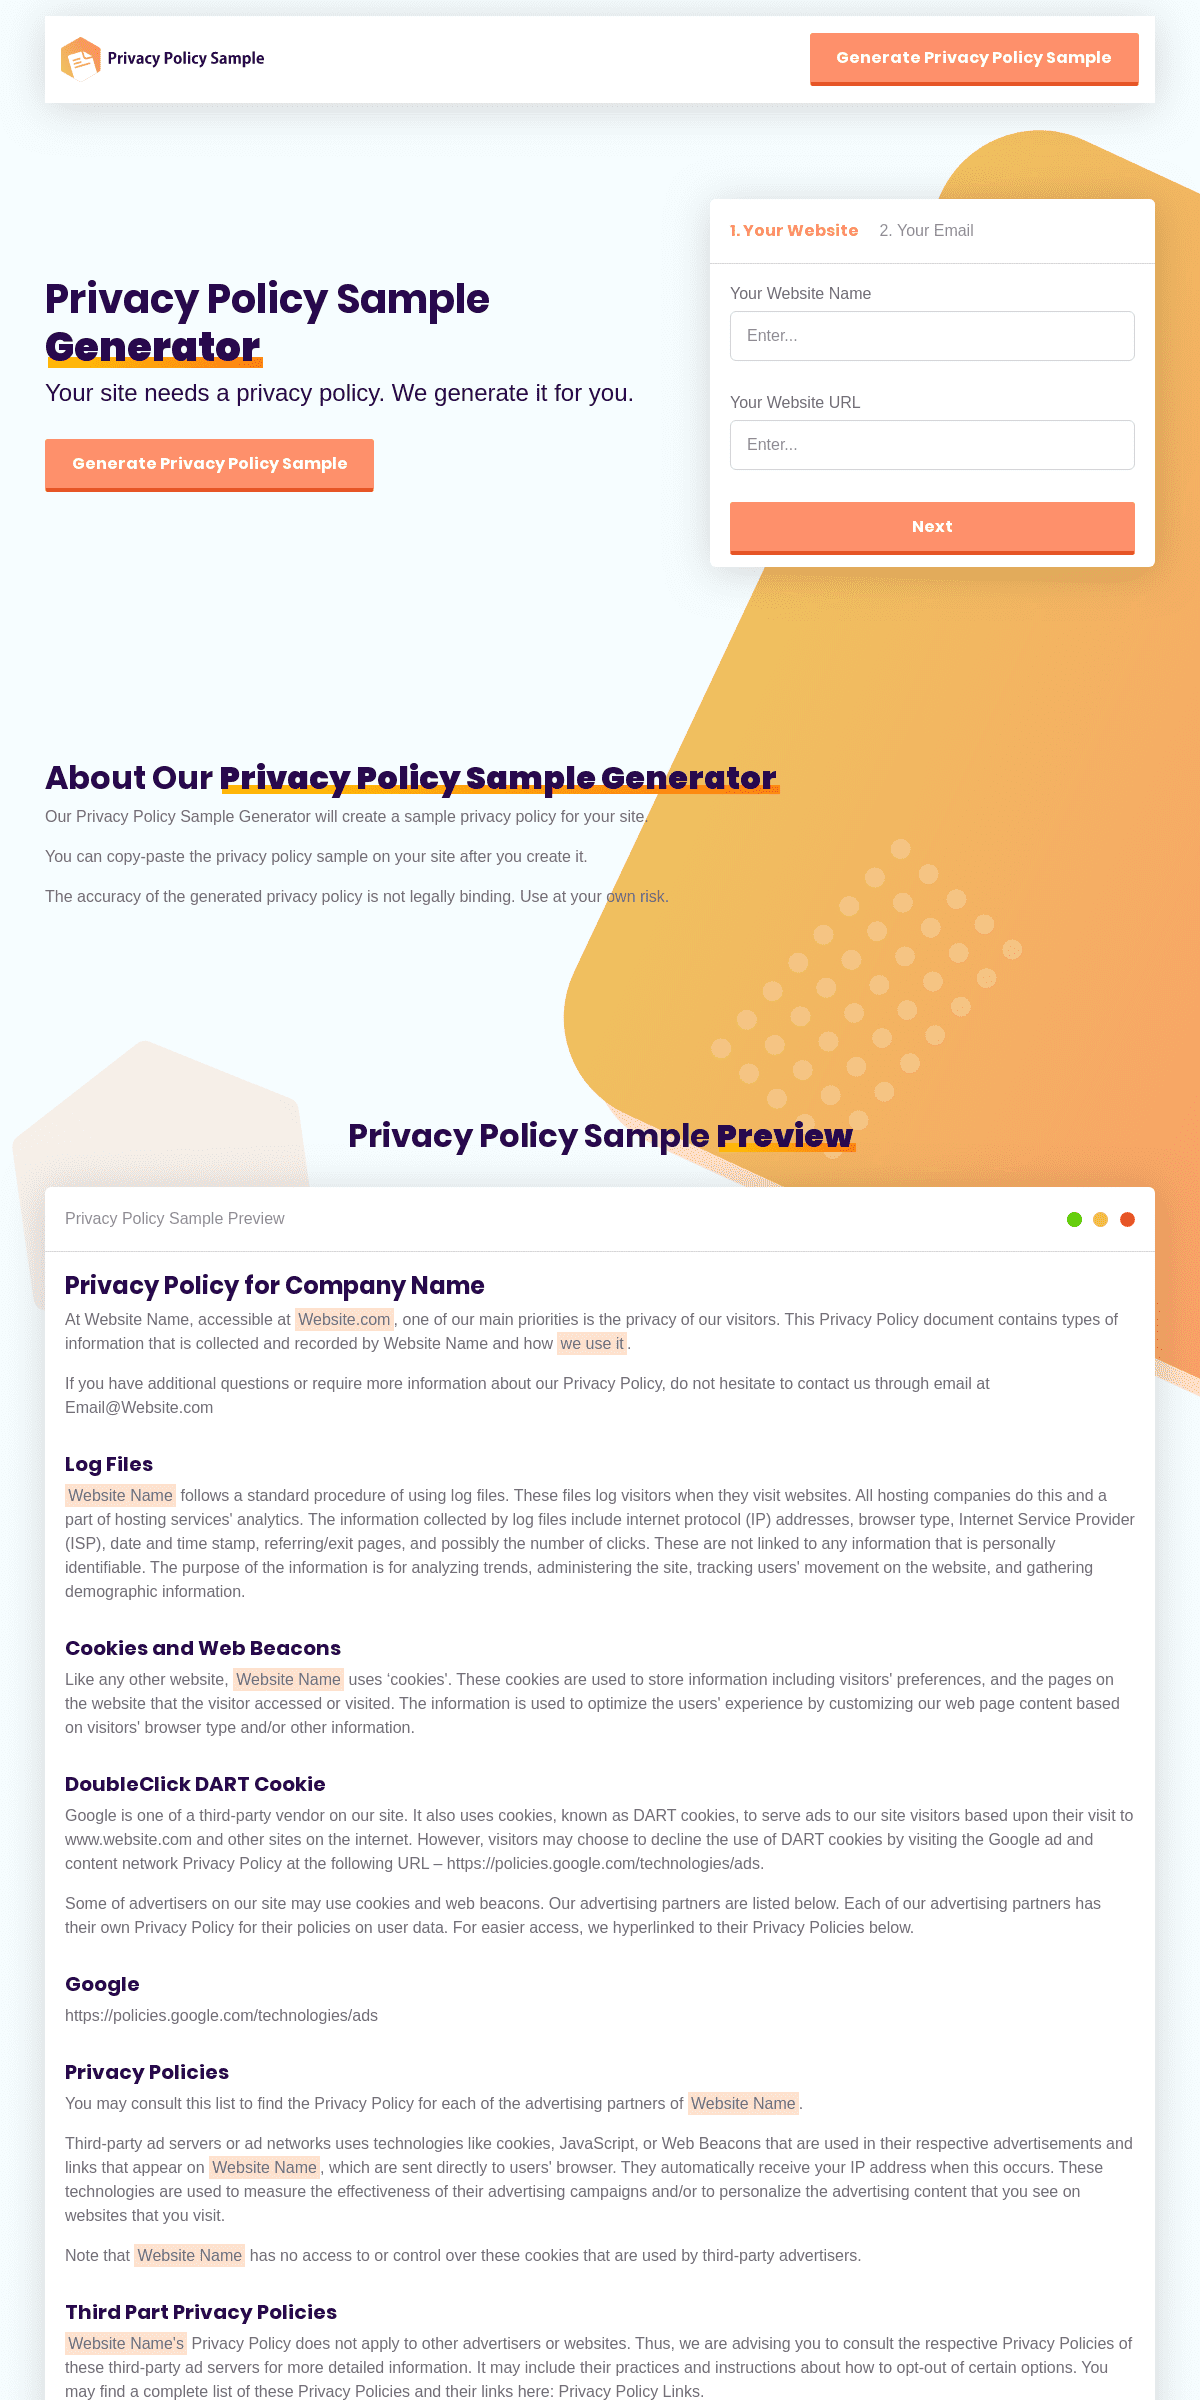 A complete backup of privacy-policy-sample.com